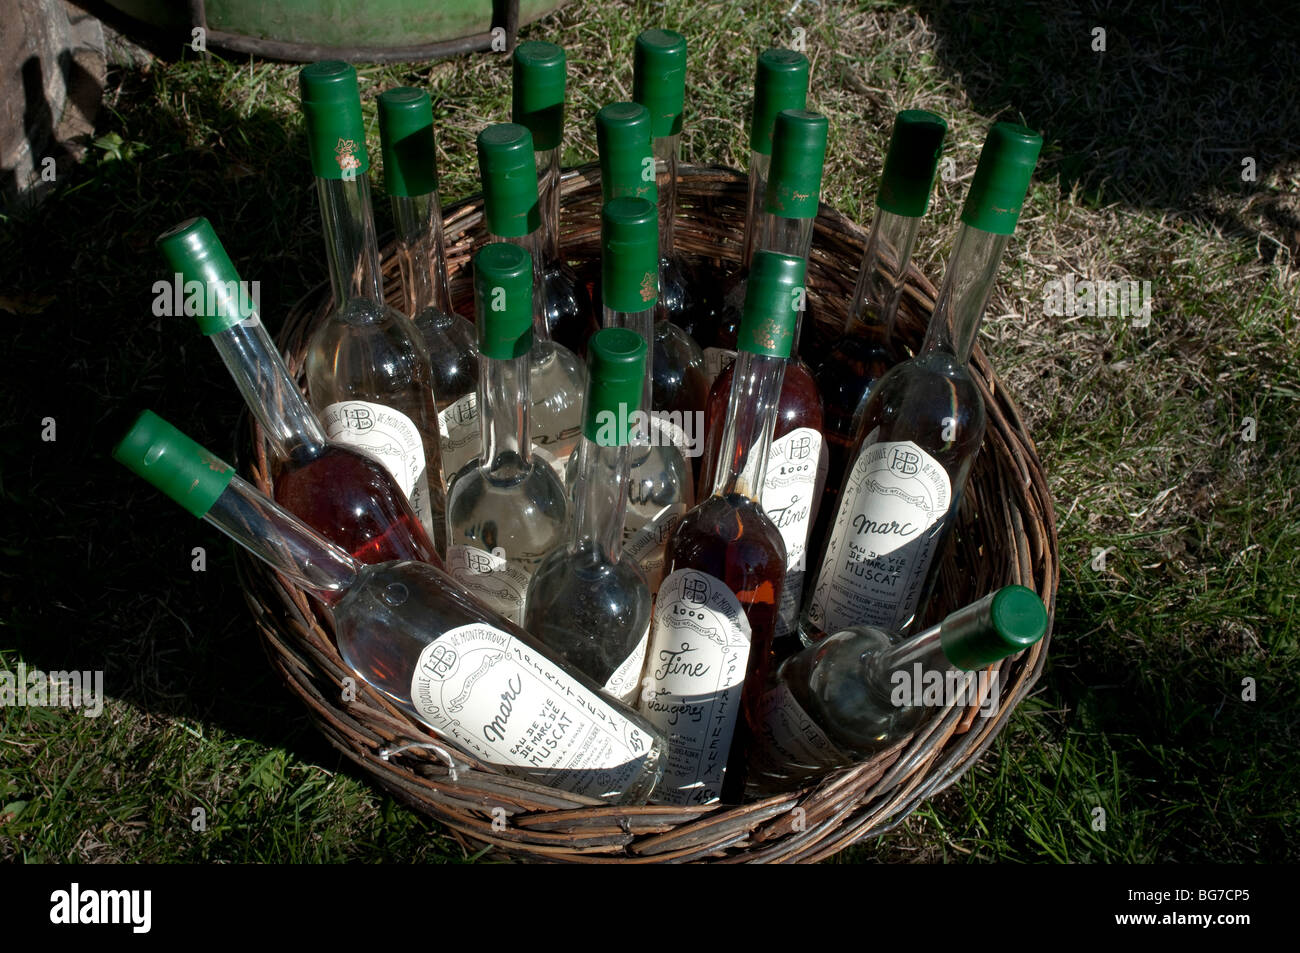 Bottles of traditionally distilled spirits in a basket, Market in Montoulieu, Herault, France Stock Photo